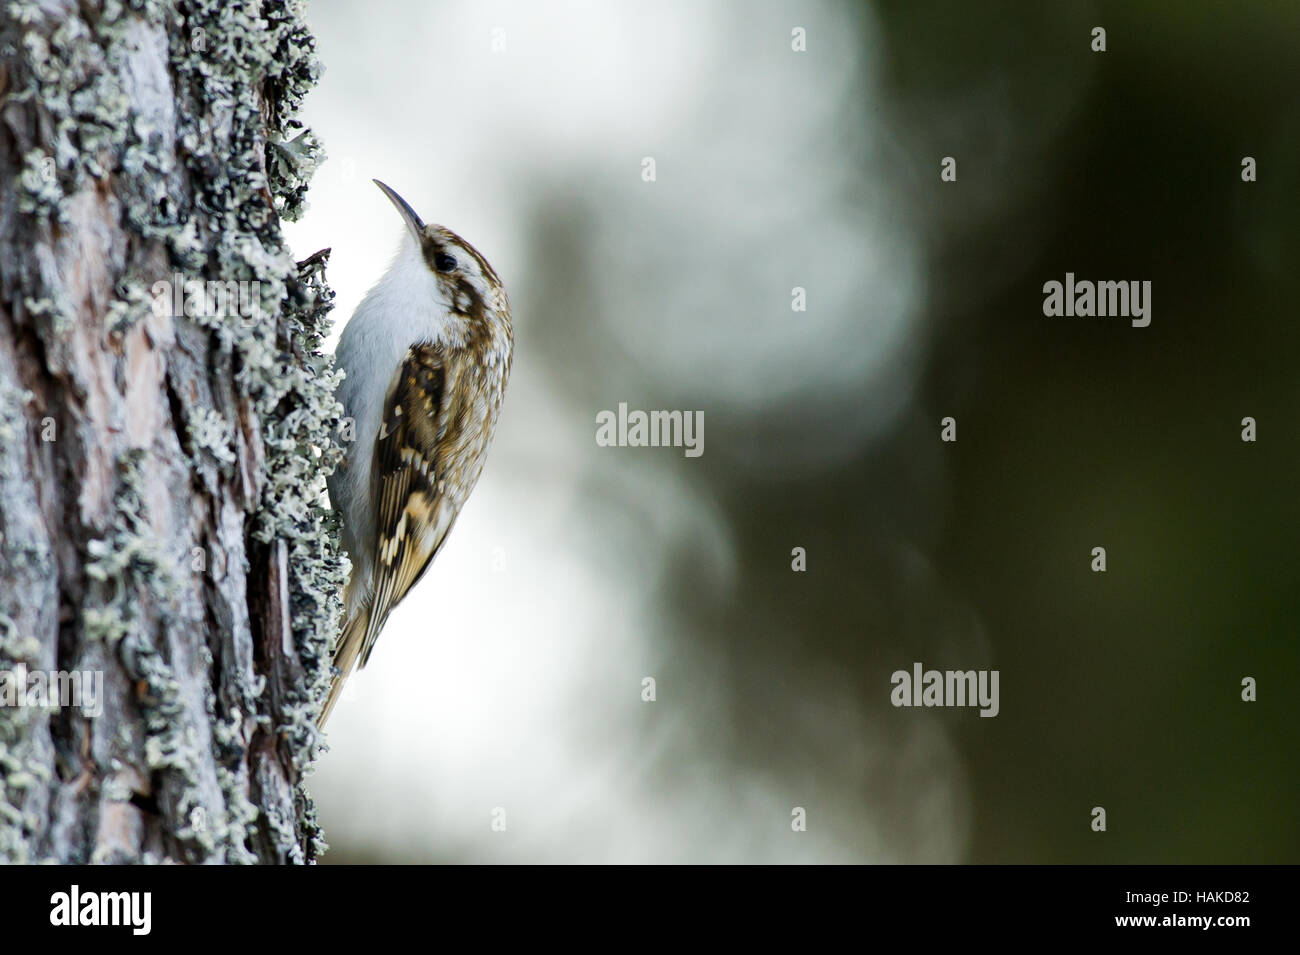 The tree-creeper searching for food with its long and thin bill under the lichen and the pine bark, de-focused background Stock Photo